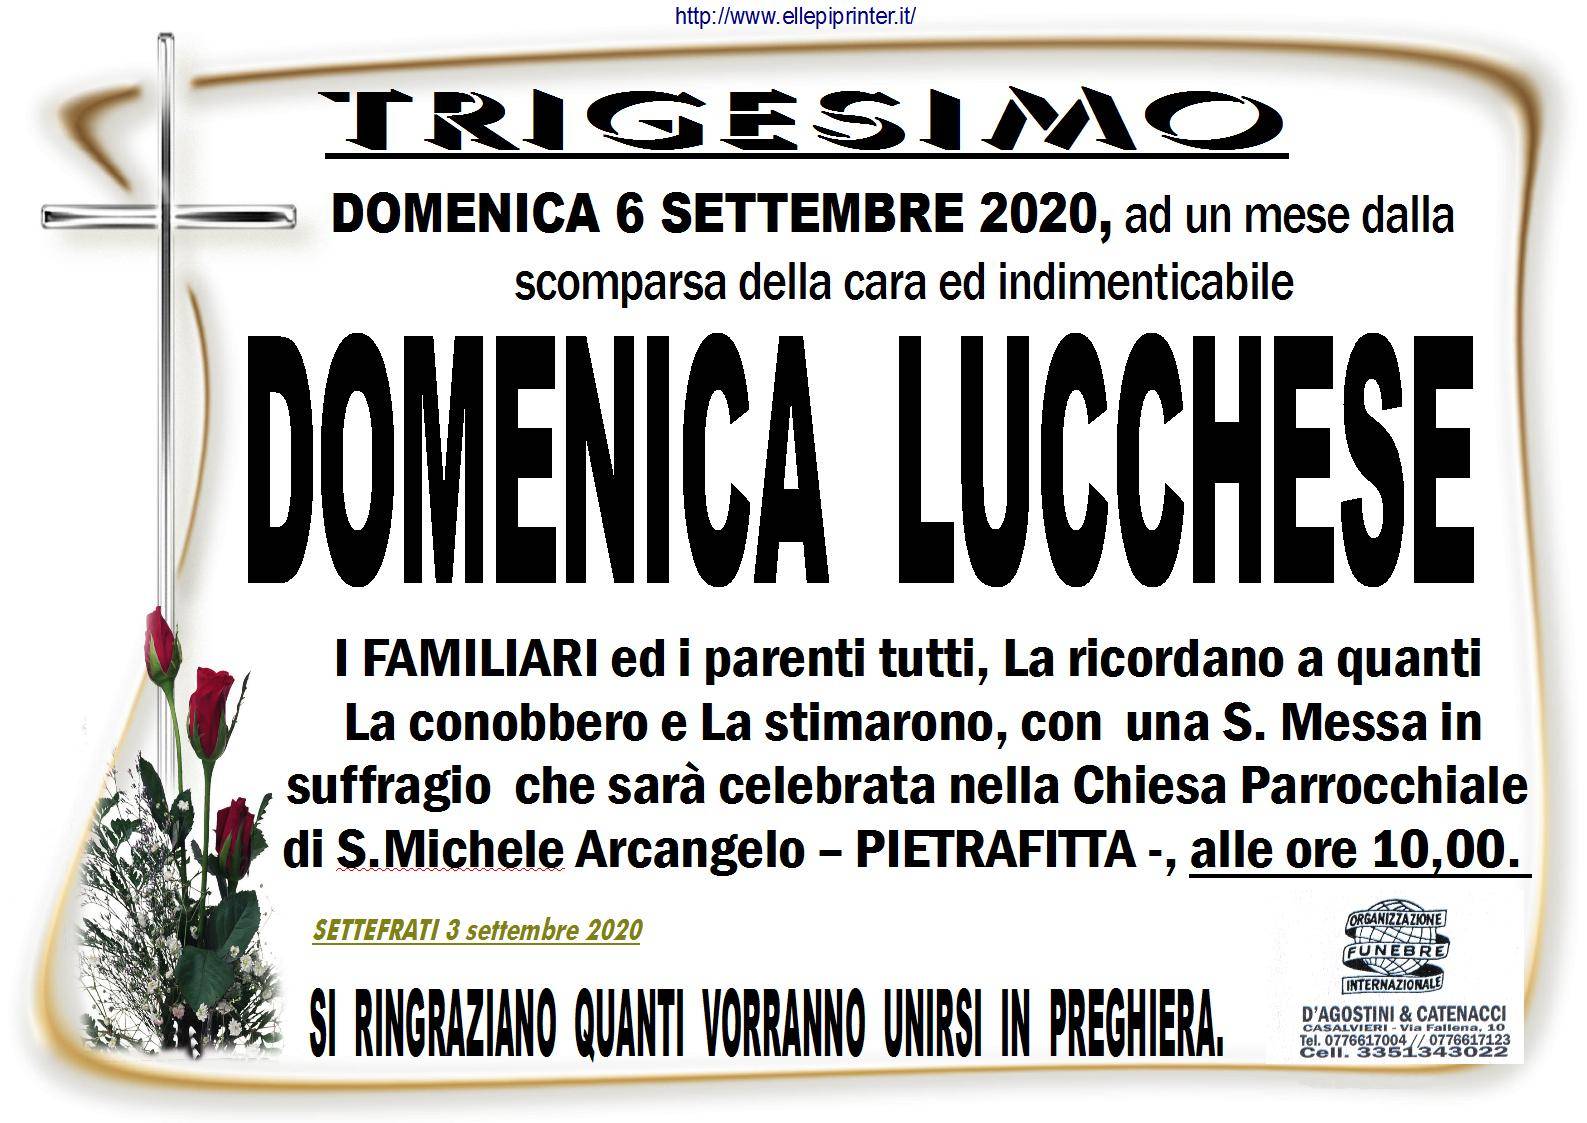 Domenica Lucchese